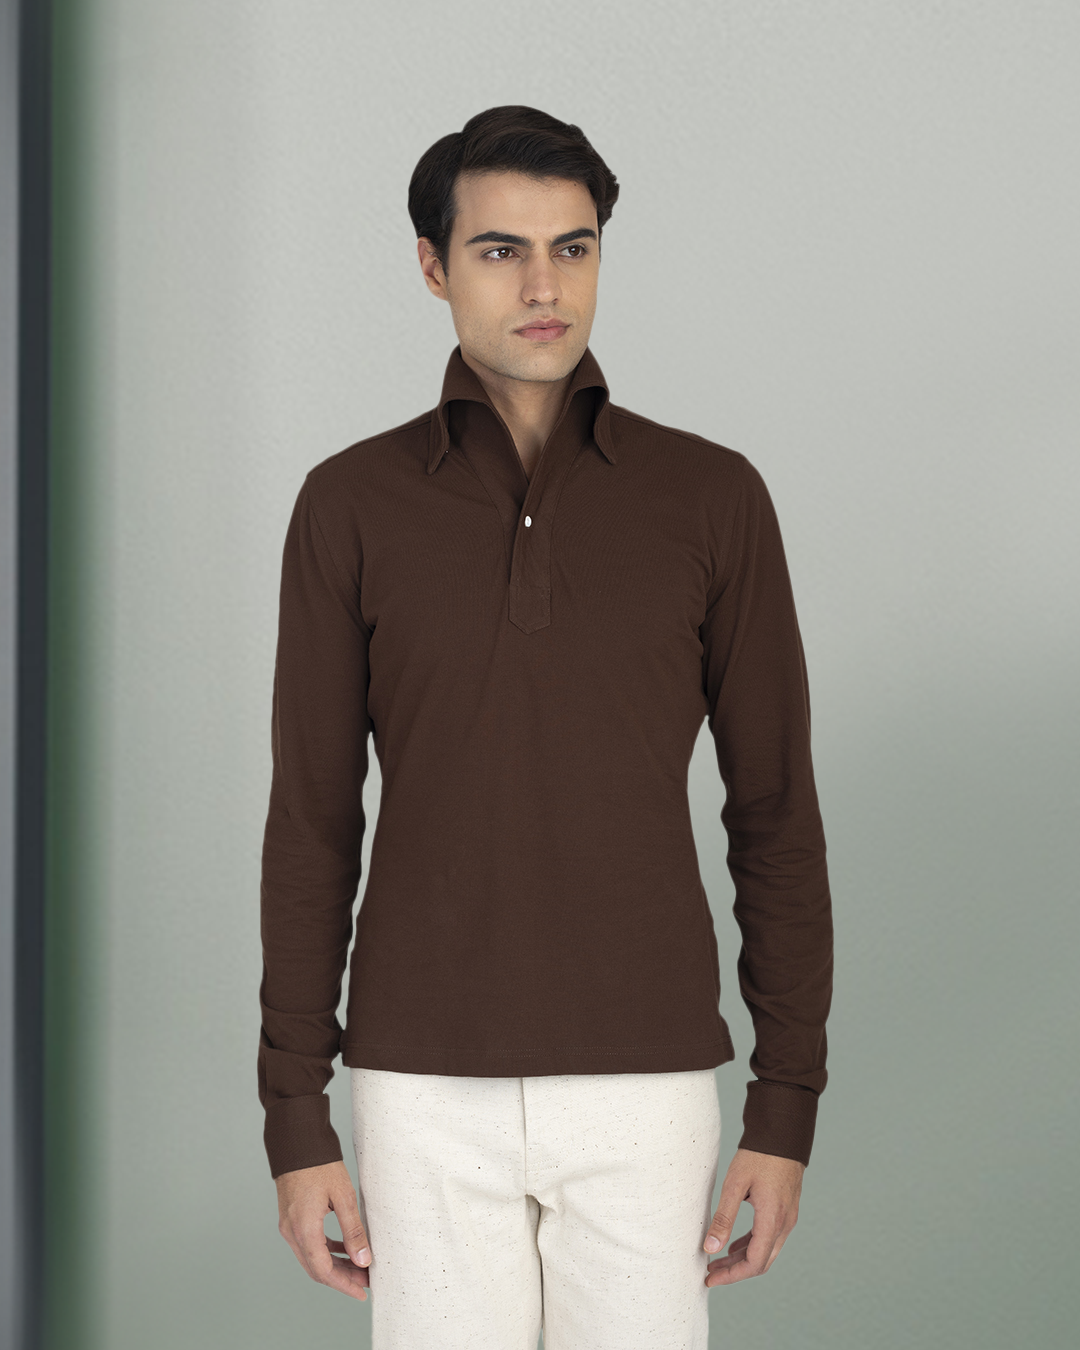 Model wearing the custom oxford polo shirt for men by Luxire in brown pique